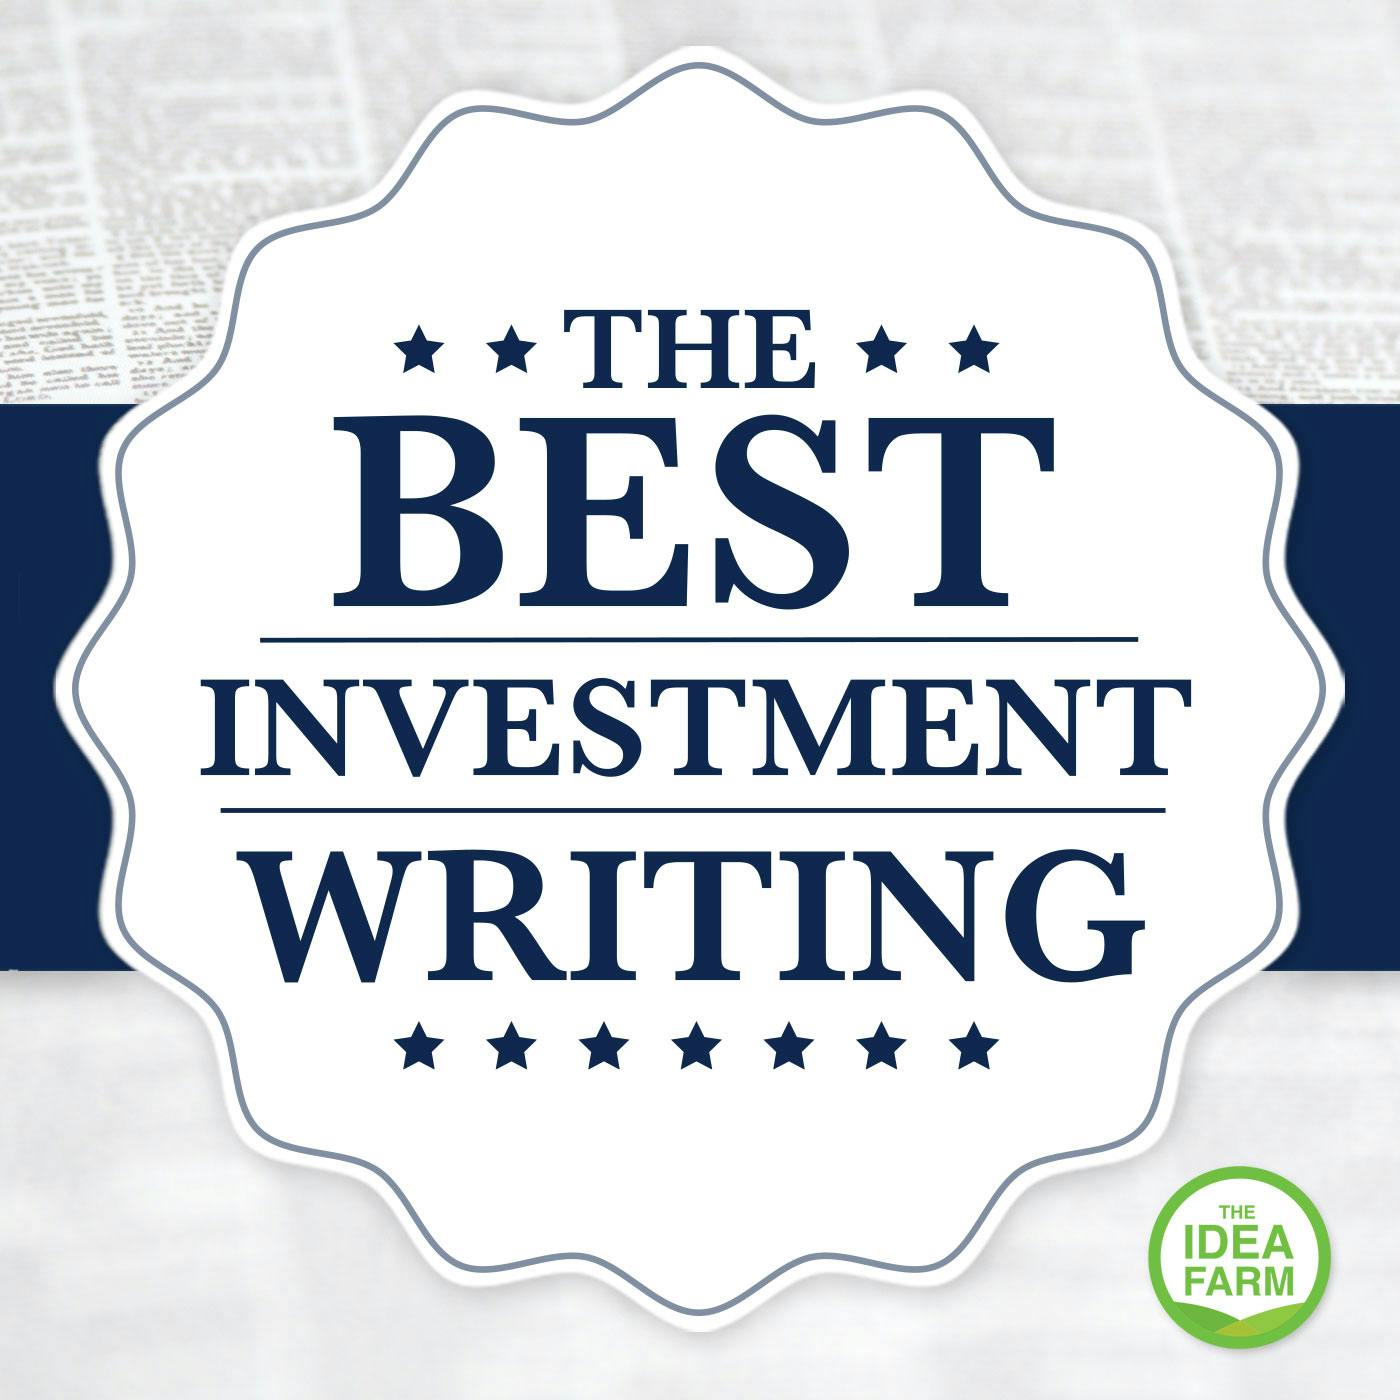 The Best Investment Writing Volume 5: Peter Chiappinelli, GMO – The Passive Aggressive Agg, Revisited